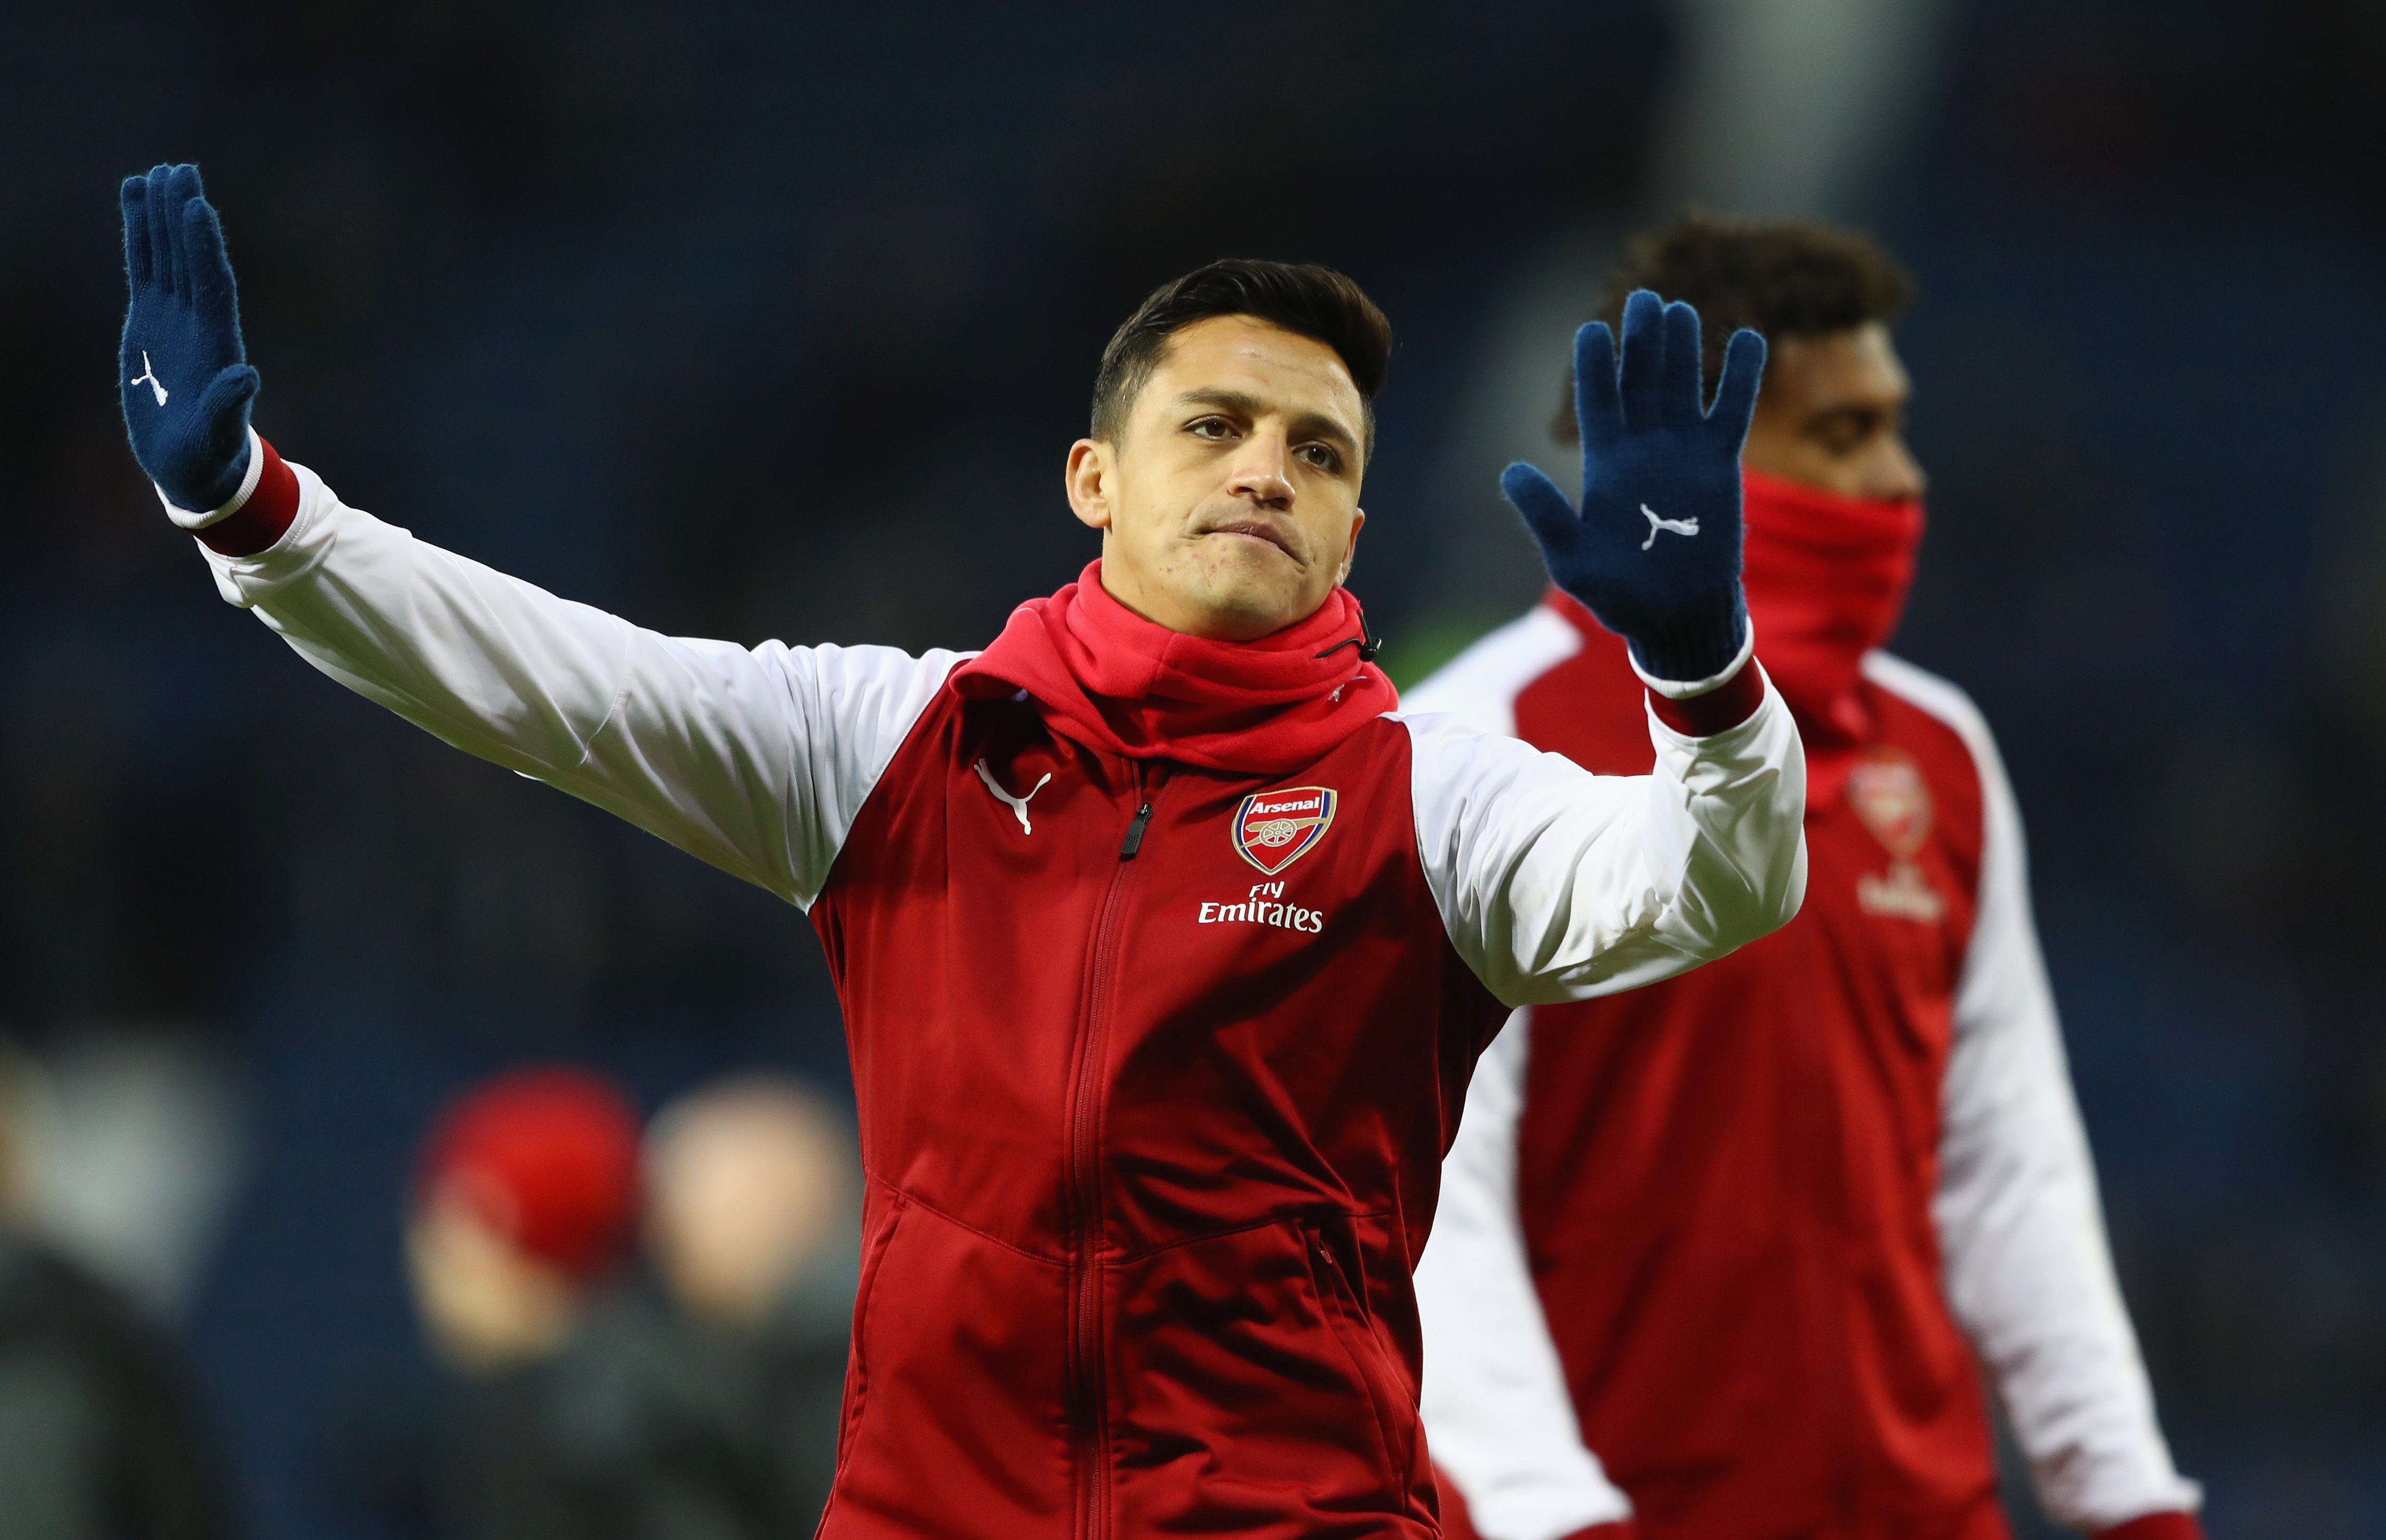 WEST BROMWICH, ENGLAND - DECEMBER 31:  Alexis Sanchez of Arsenal gestures prior to the Premier League match between West Bromwich Albion and Arsenal at The Hawthorns on December 31, 2017 in West Bromwich, England.  (Photo by Michael Steele/Getty Images)